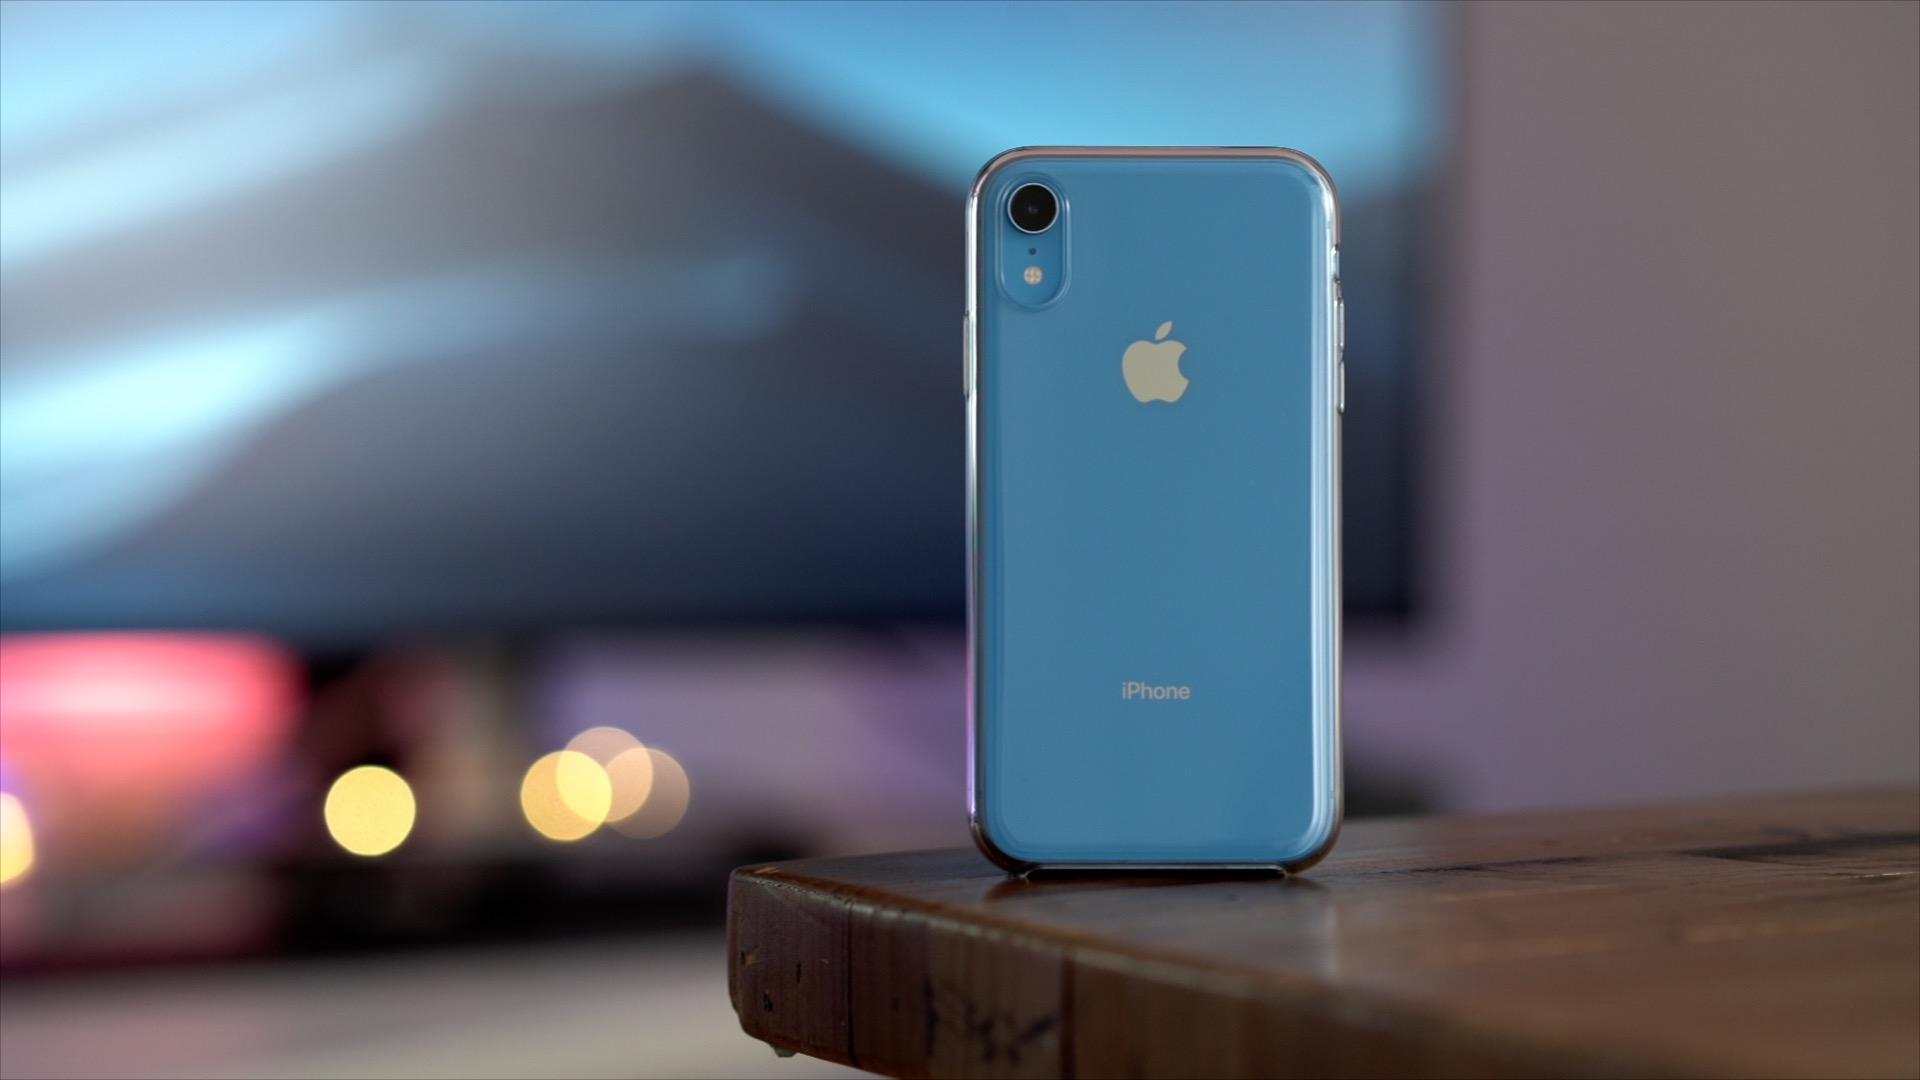 iPhone XR made up 32% of iPhone sales in November, down from